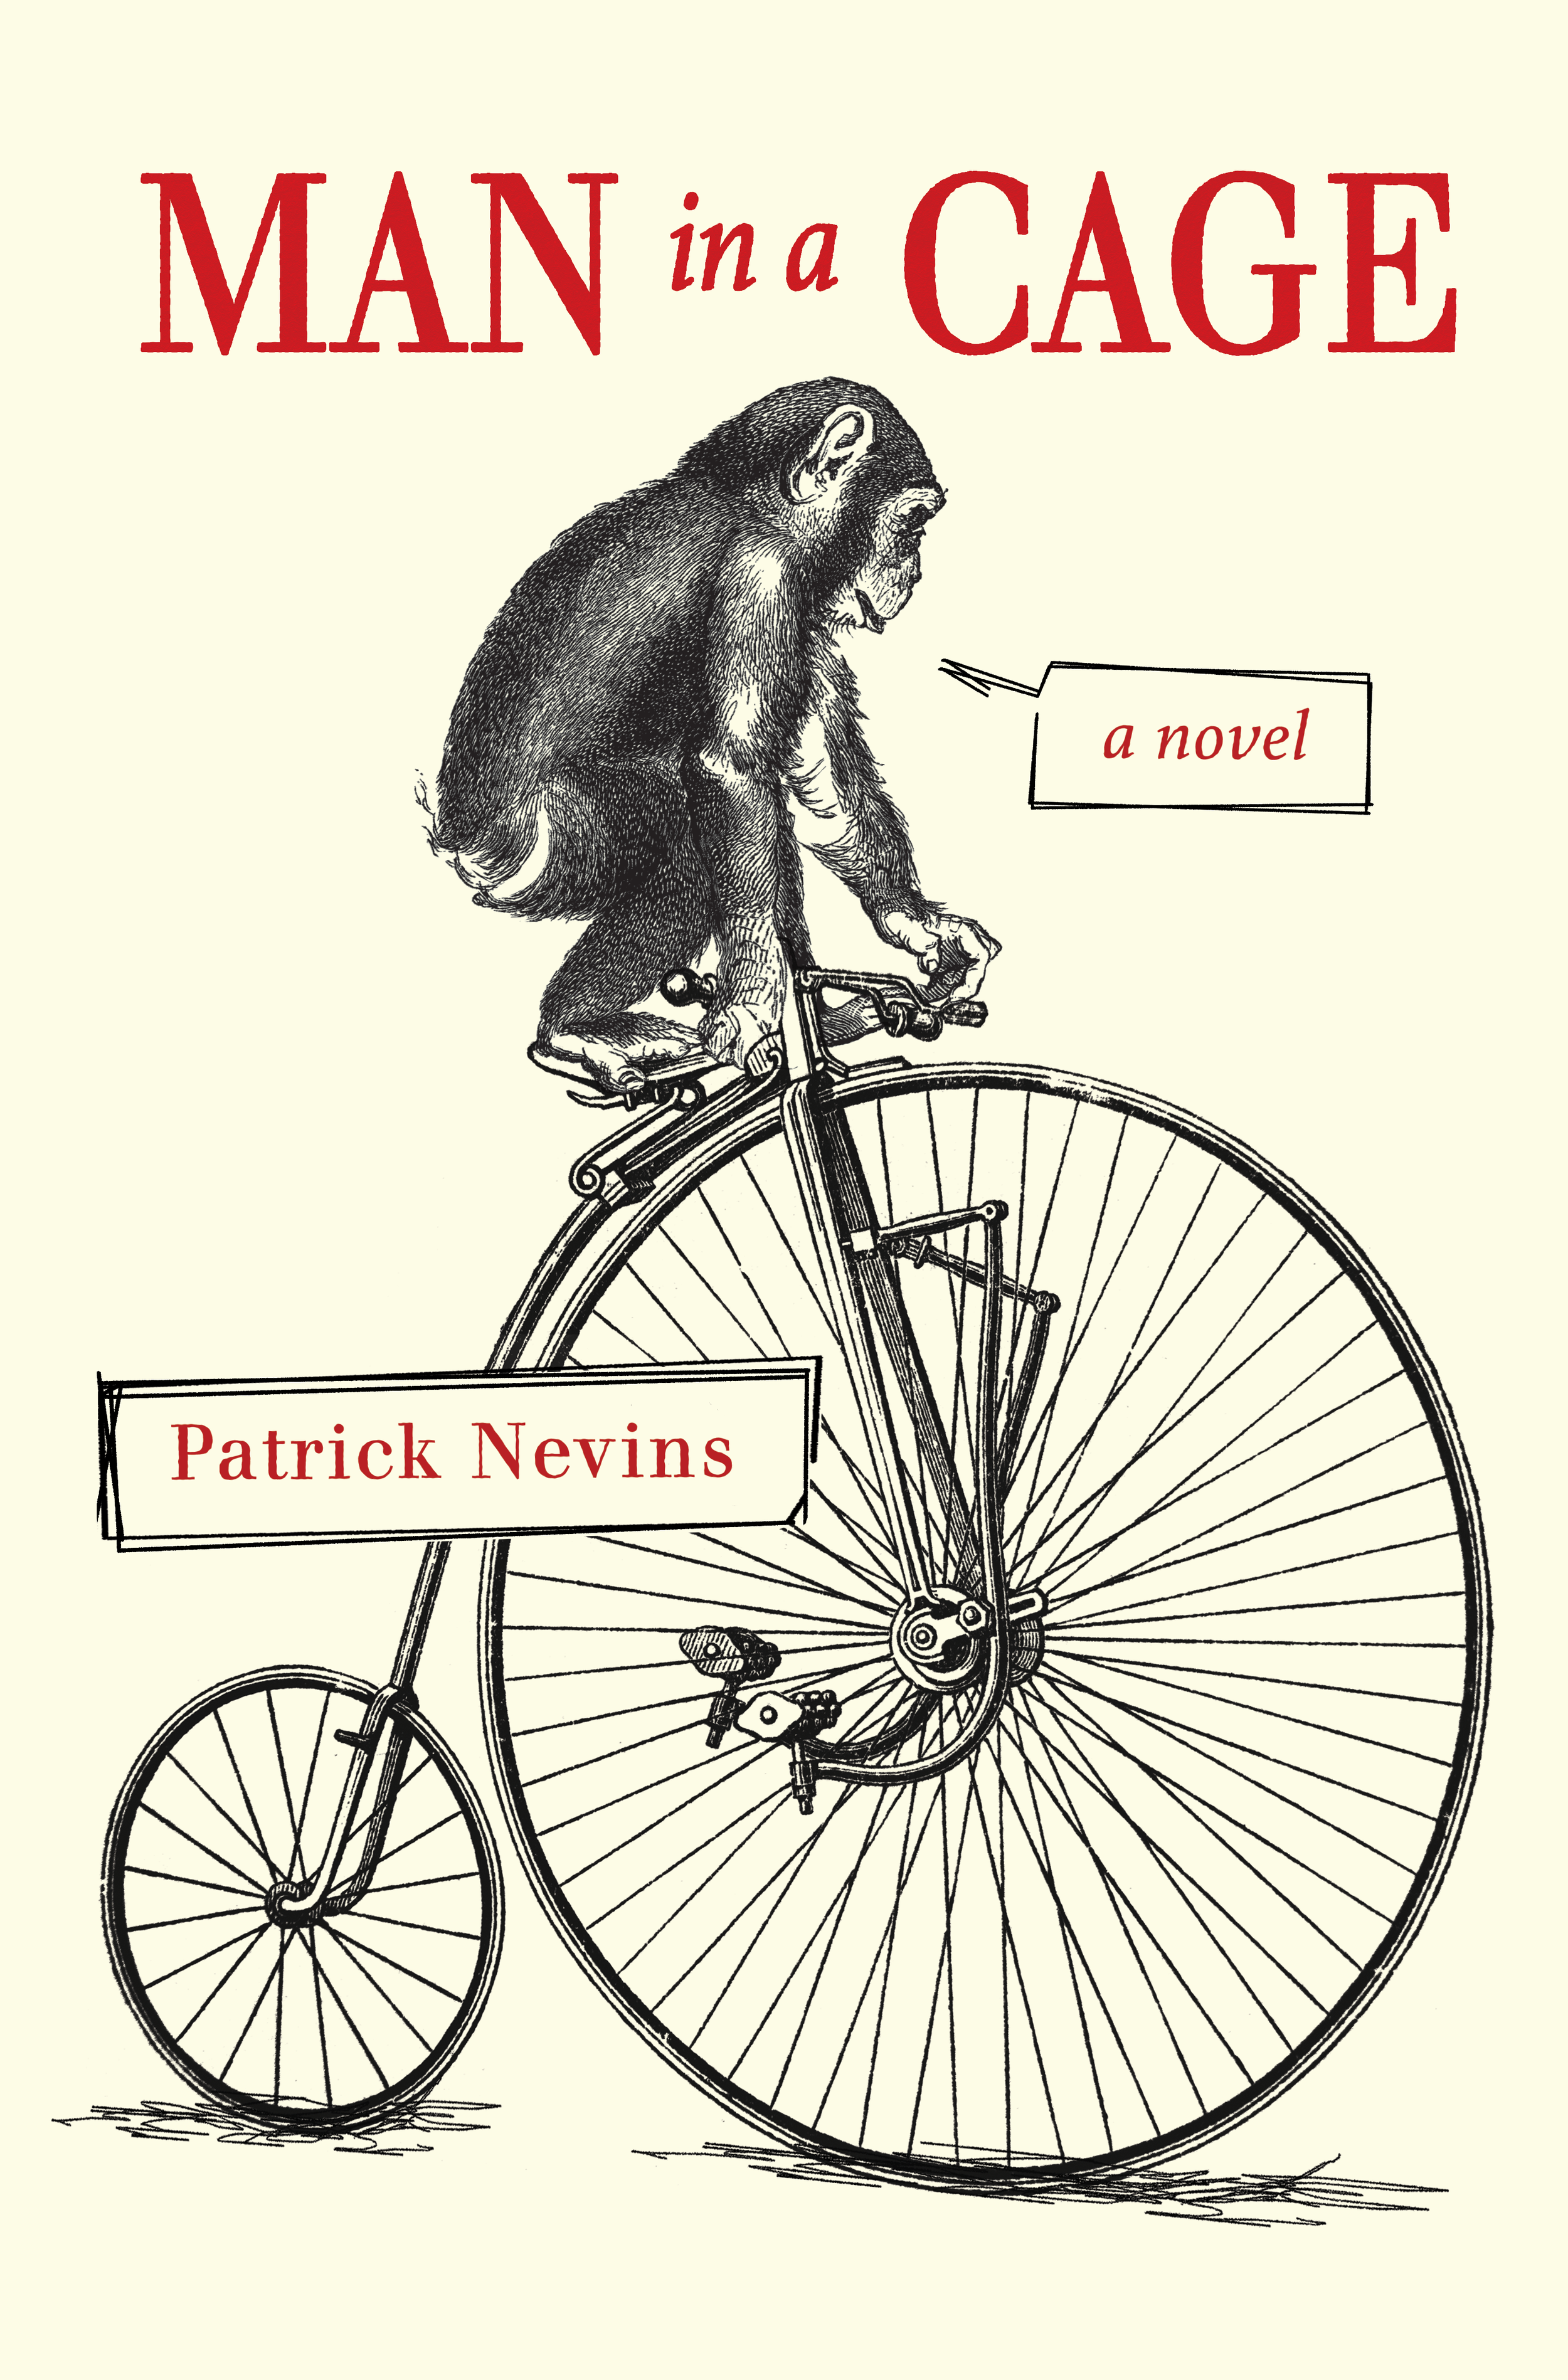 Man in a Cage, a novel by Patrick Nevins